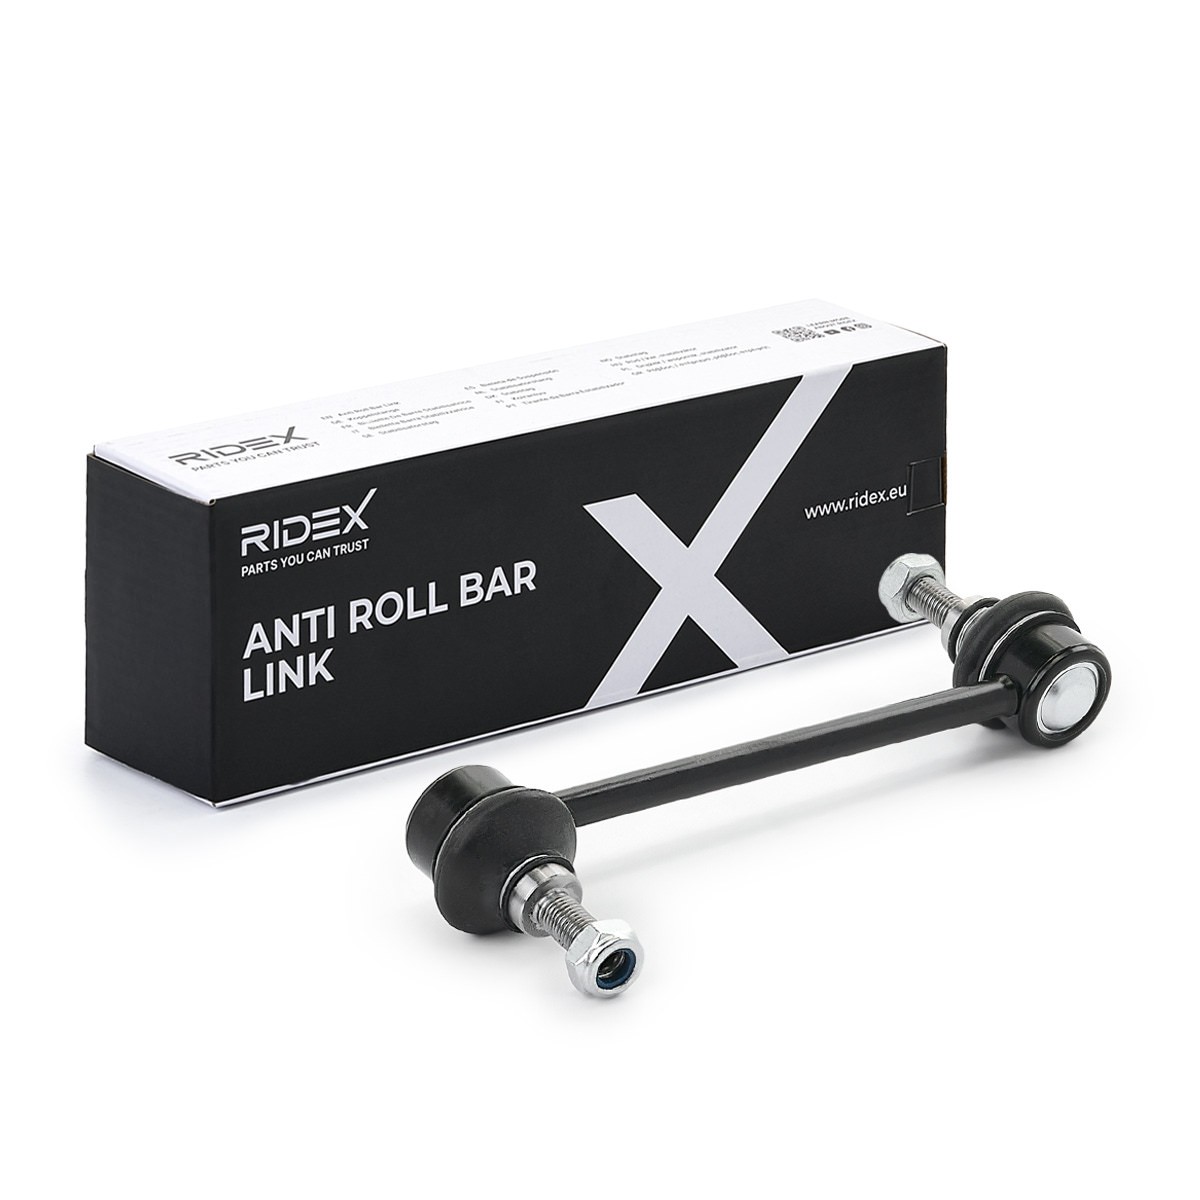 Great value for money - RIDEX Anti-roll bar link 3229S0728